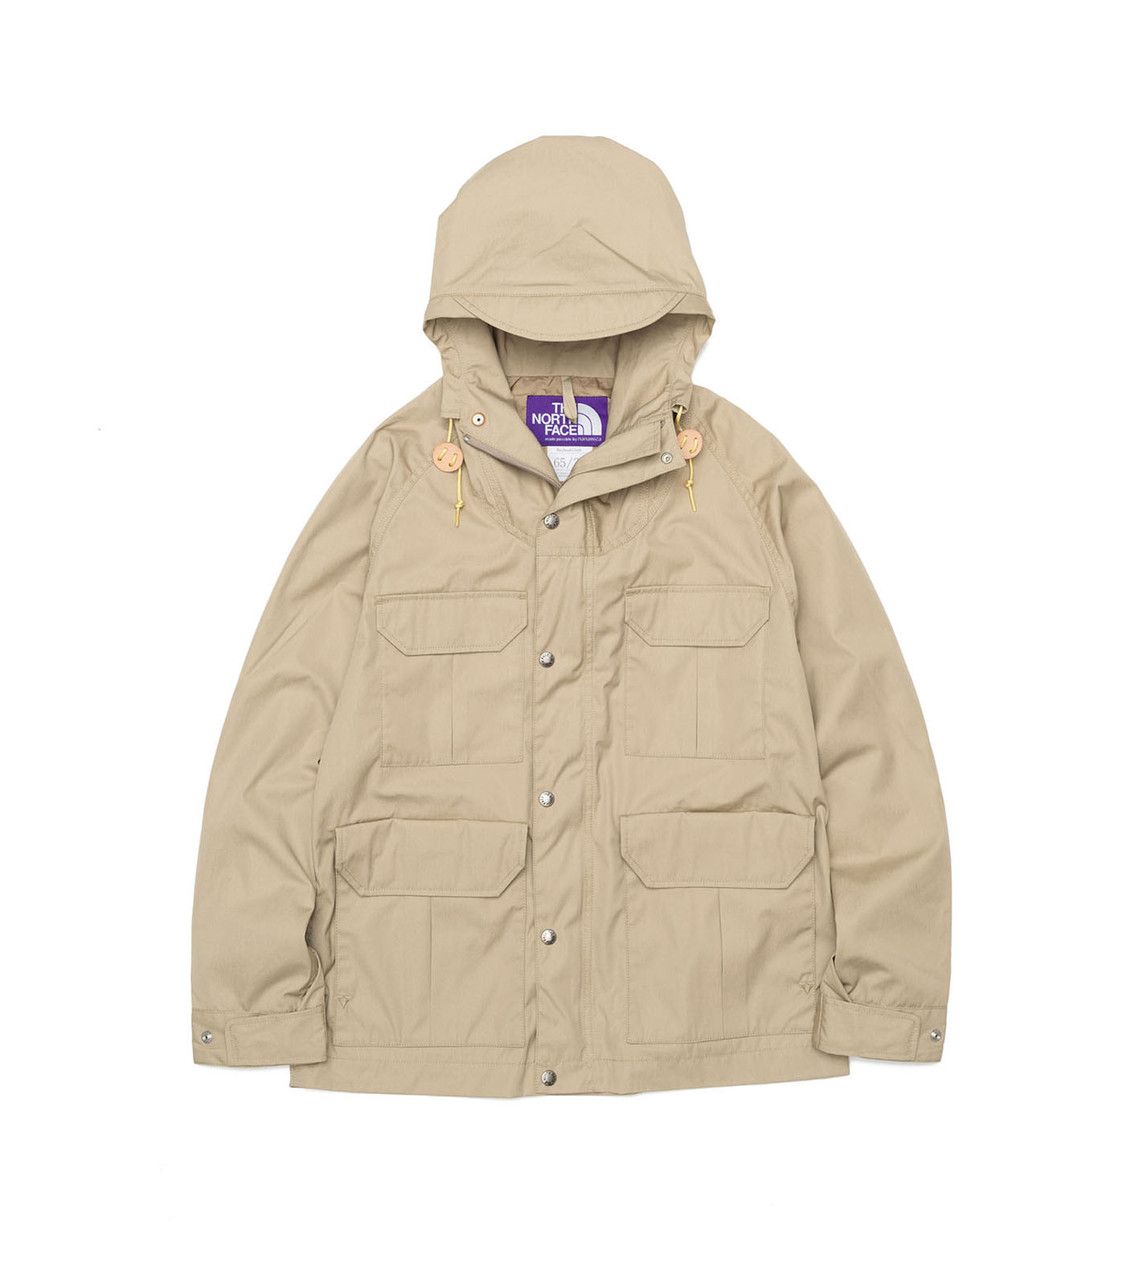 THE NORTH FACE PURPLE LABEL 65/35 Mountain Parka NP2051N | lupon.gov.ph